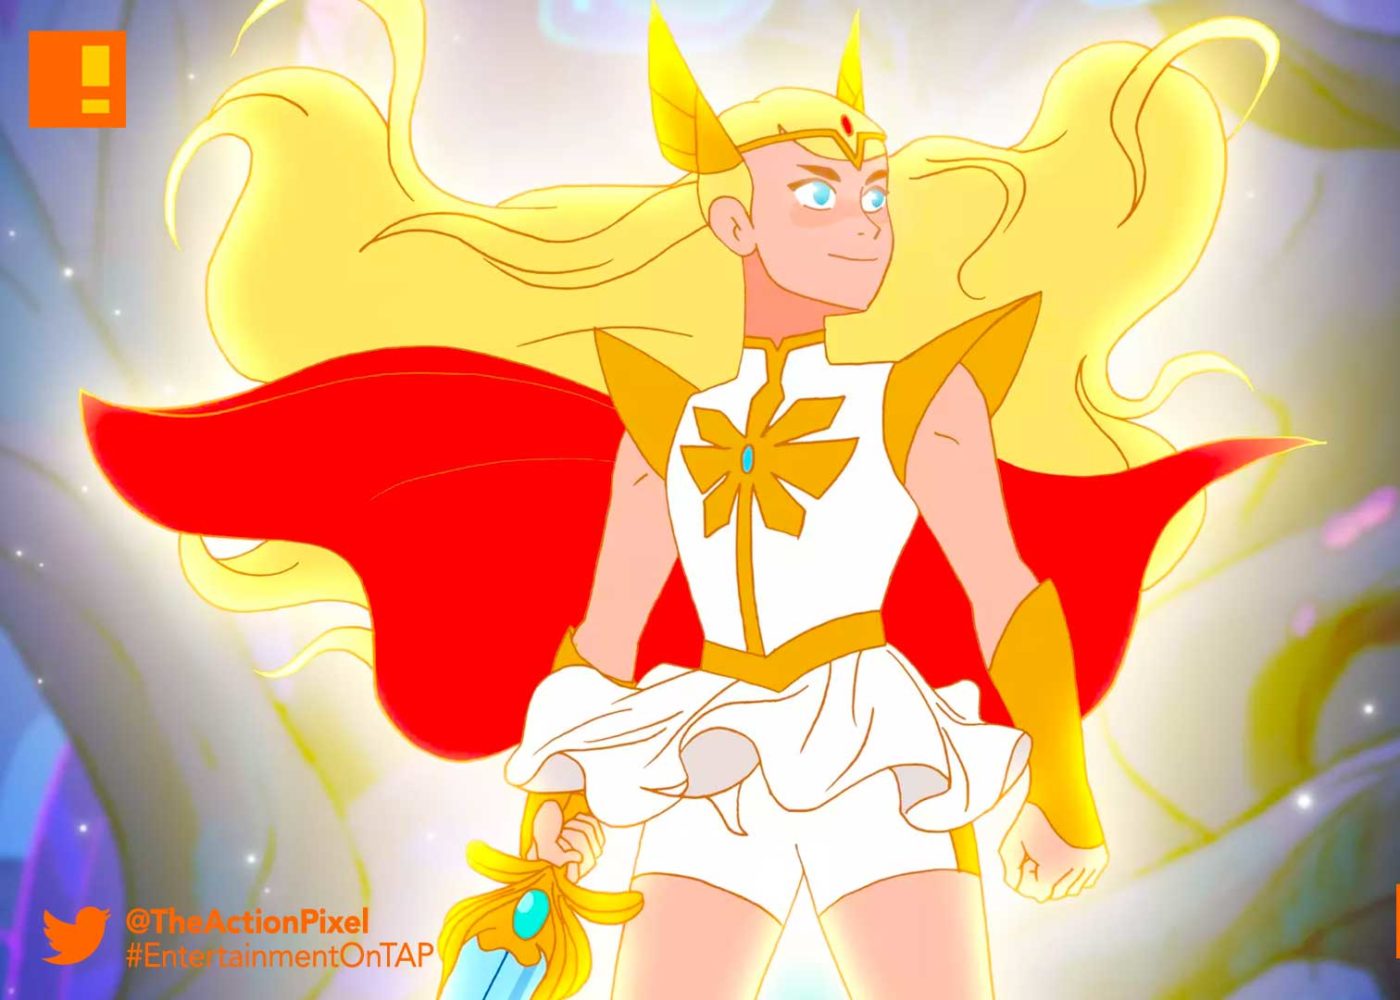 Netflix S “she Ra” Animated Series Reveals Its First Look Images The Action Pixel